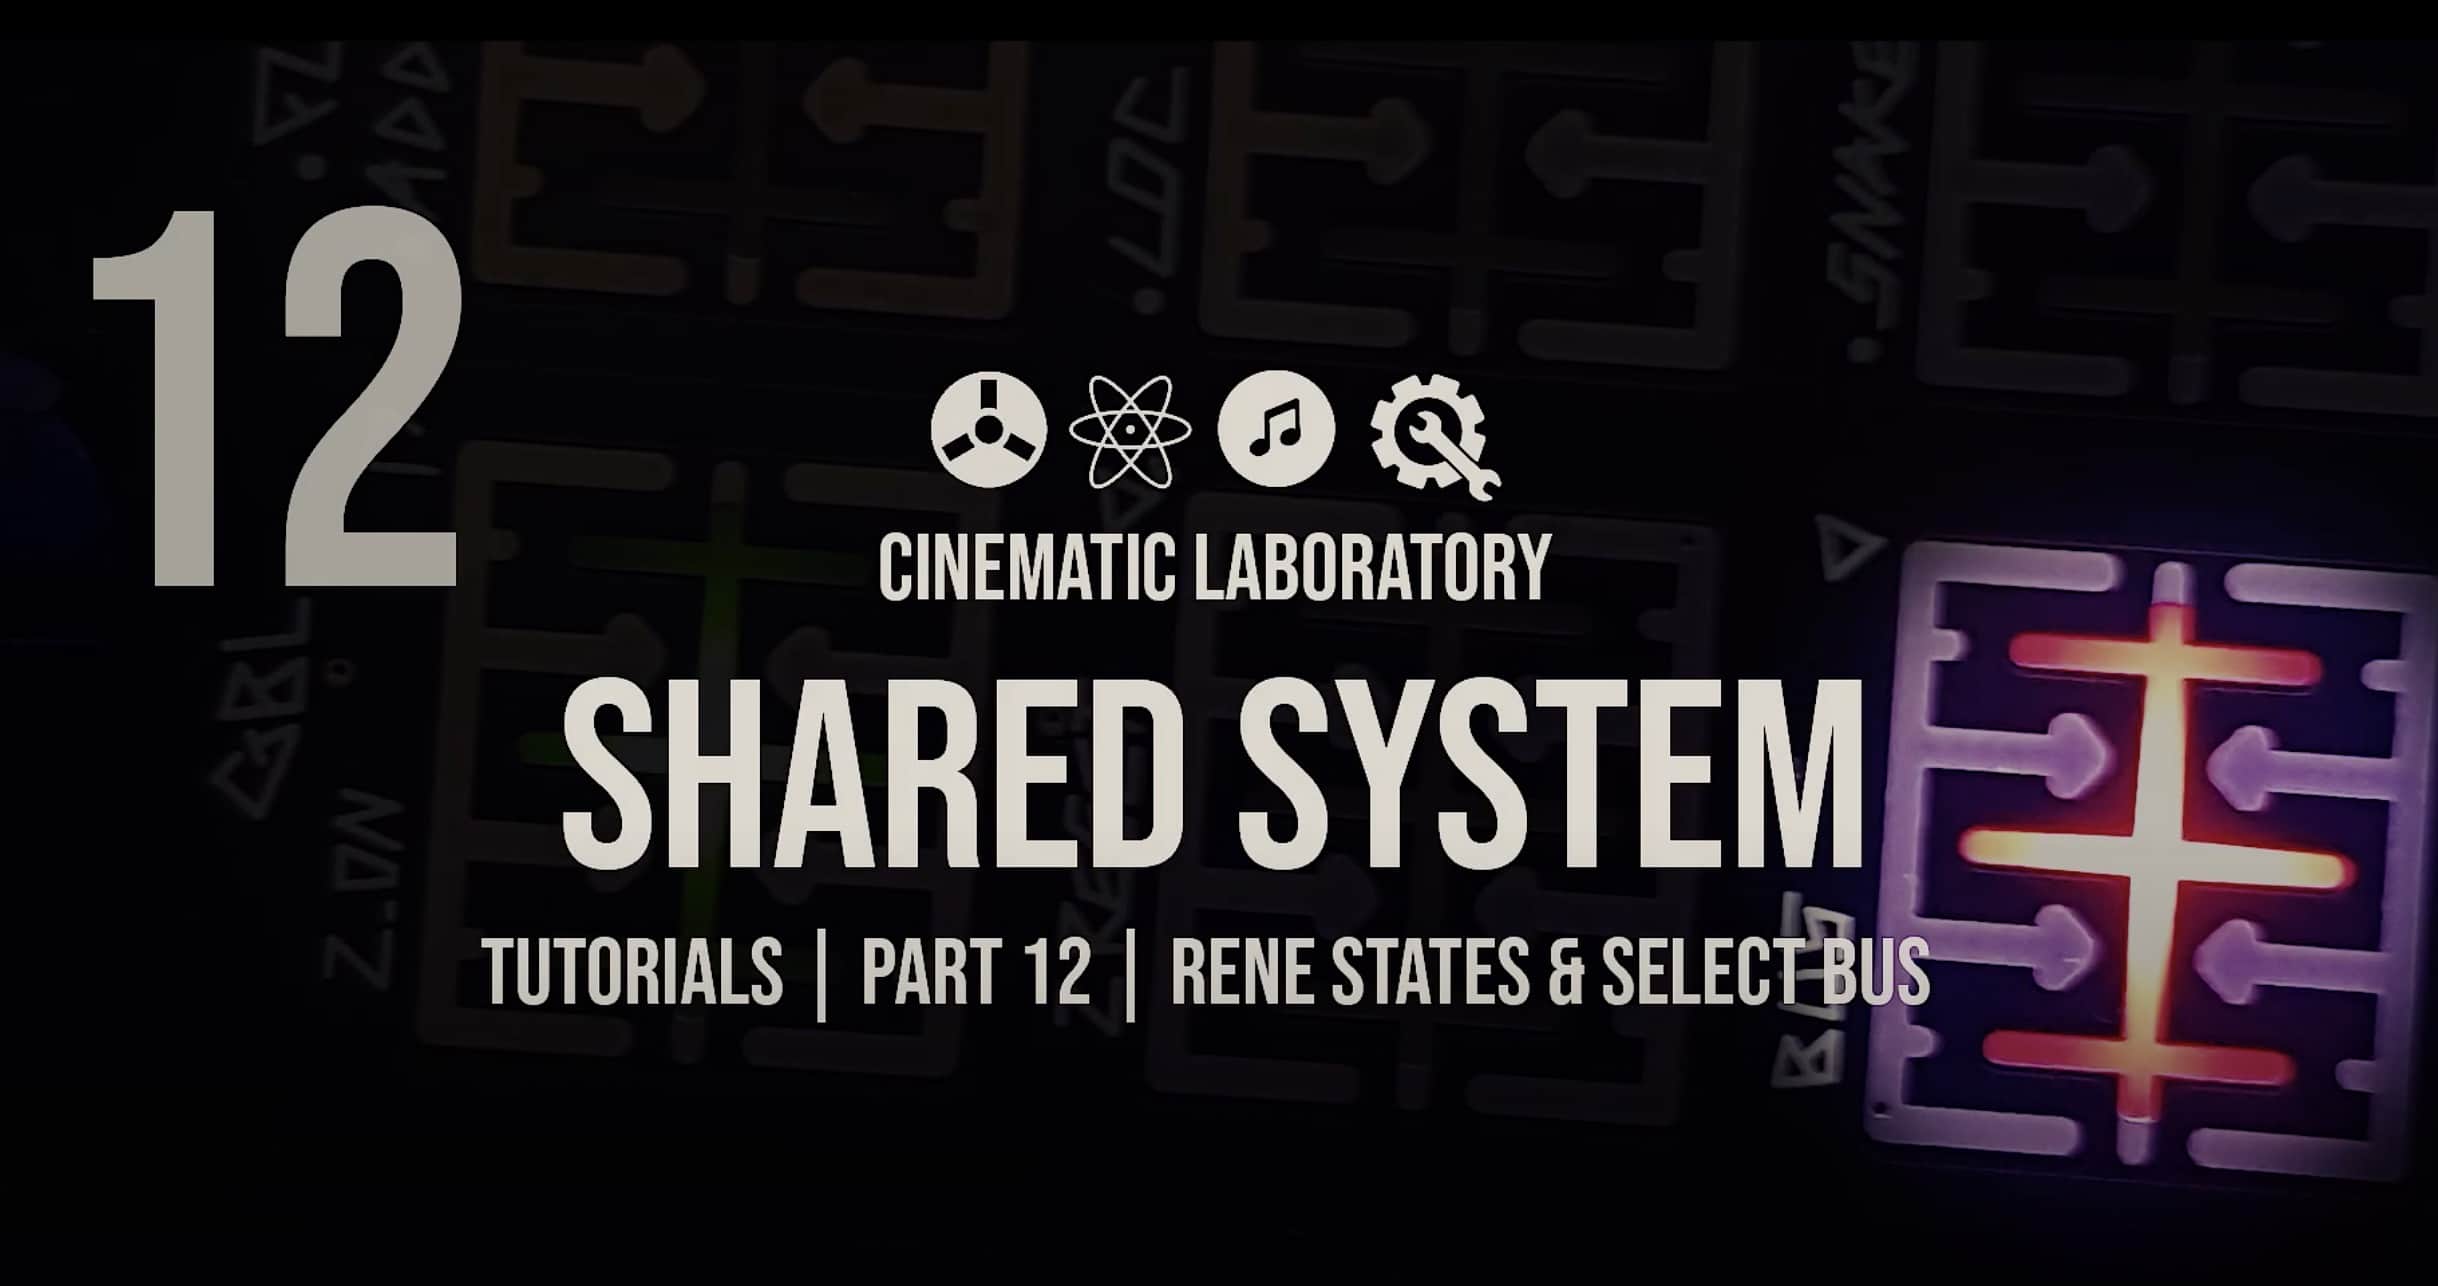 Shared System Tutorials | Part 12 - Rene States & Select Bus